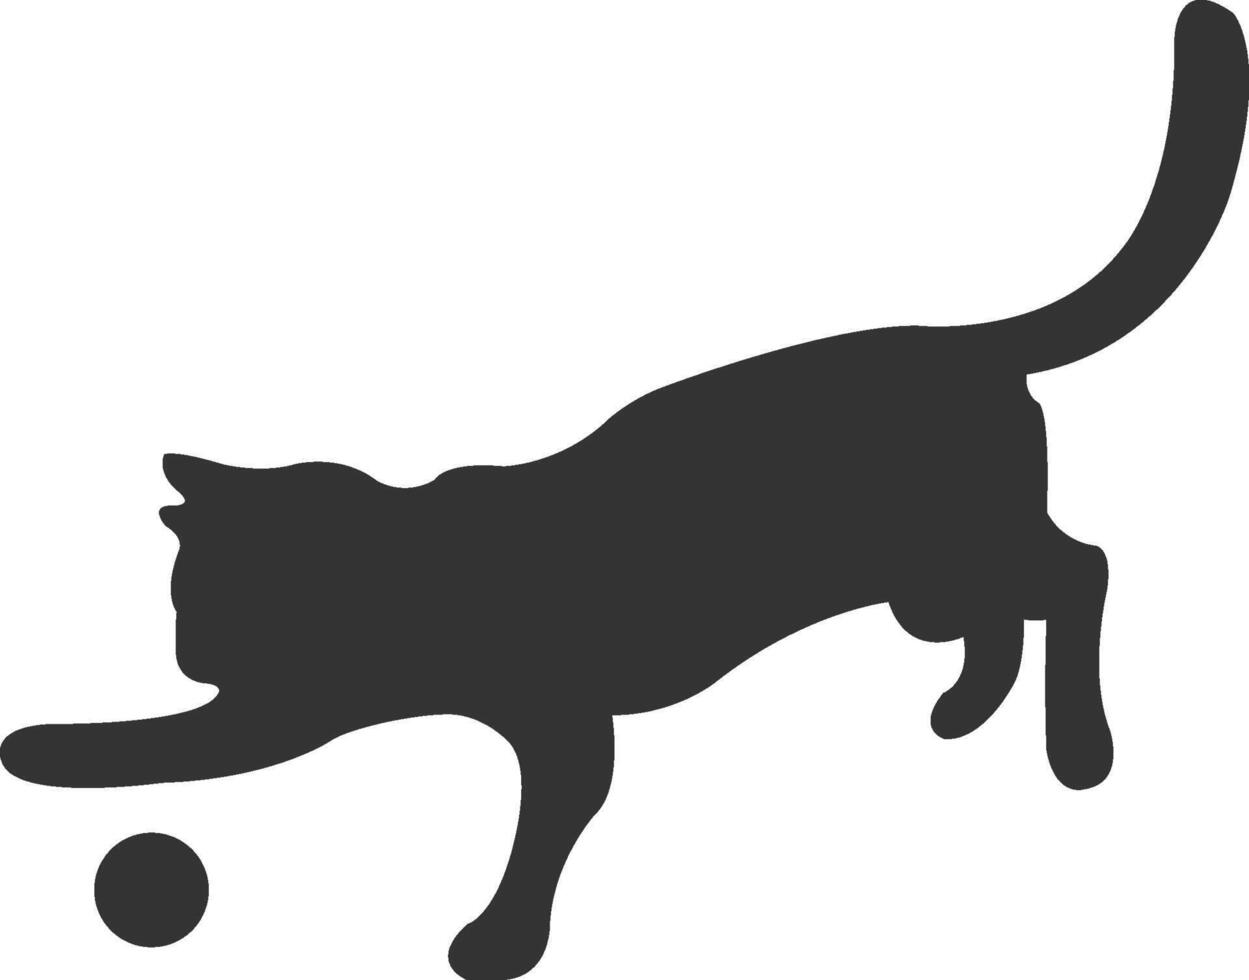 cat playing with ball illustration vector